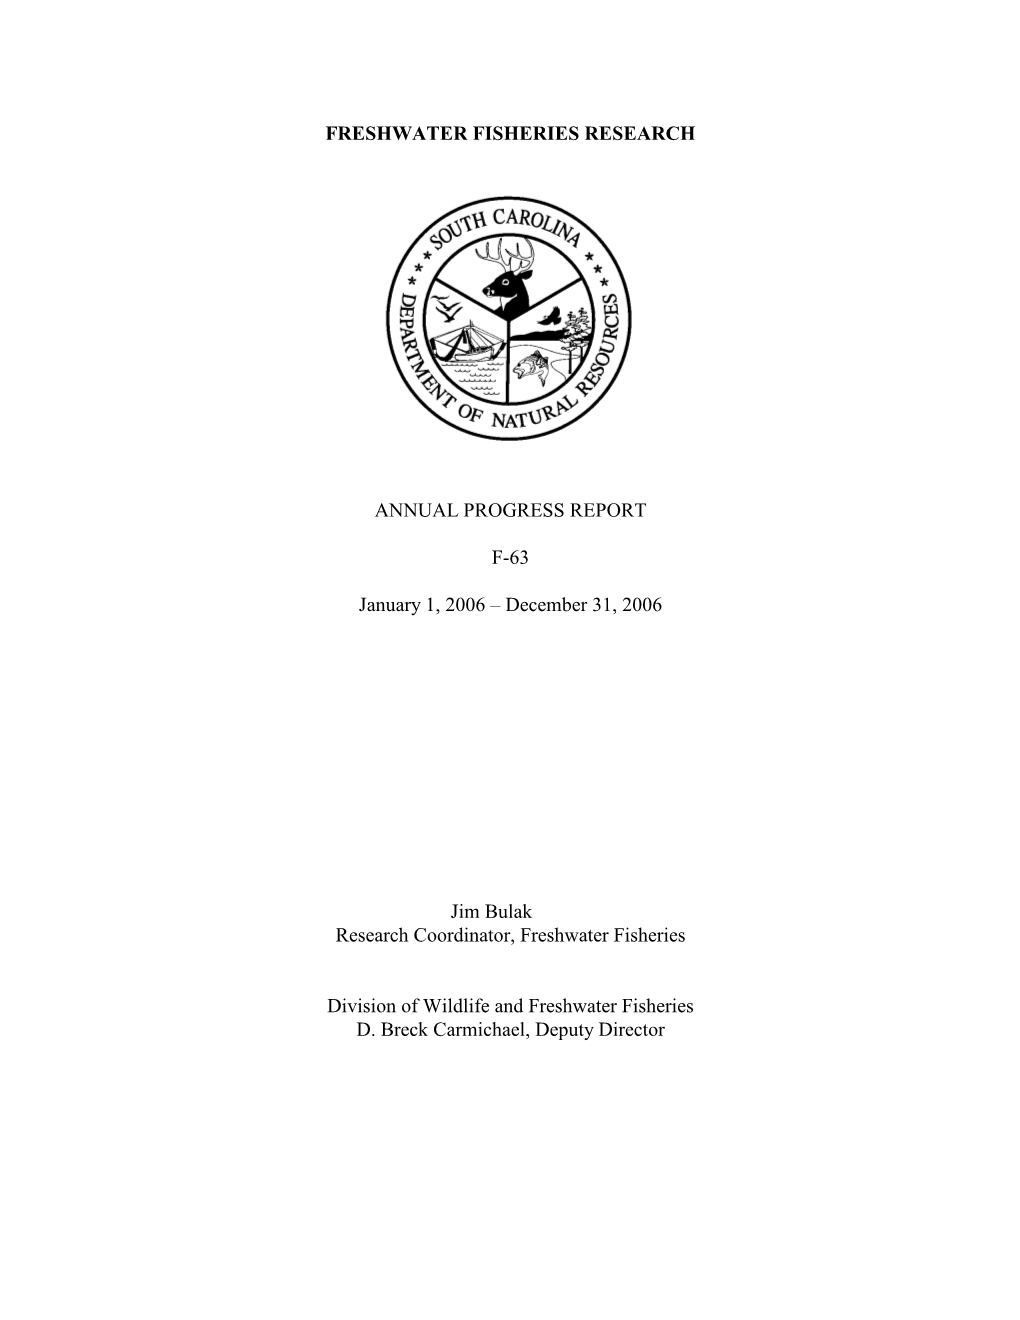 2006 Statewide Research – Freshwater Fisheries Job Progress Report